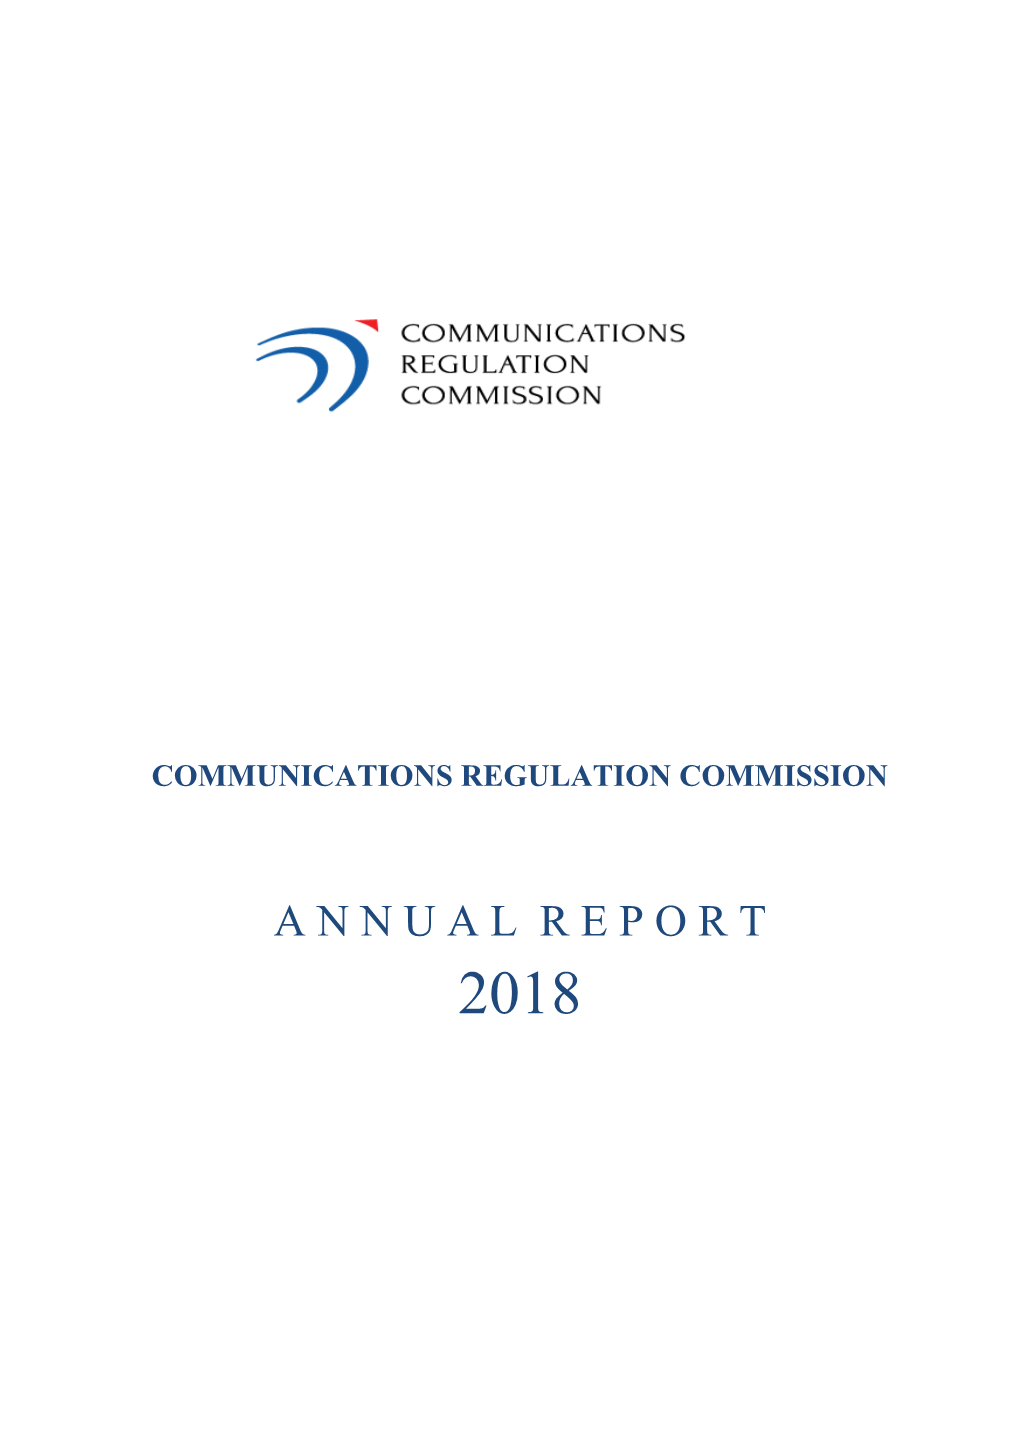 Annual Report of the Communications Regulation Commission 2018